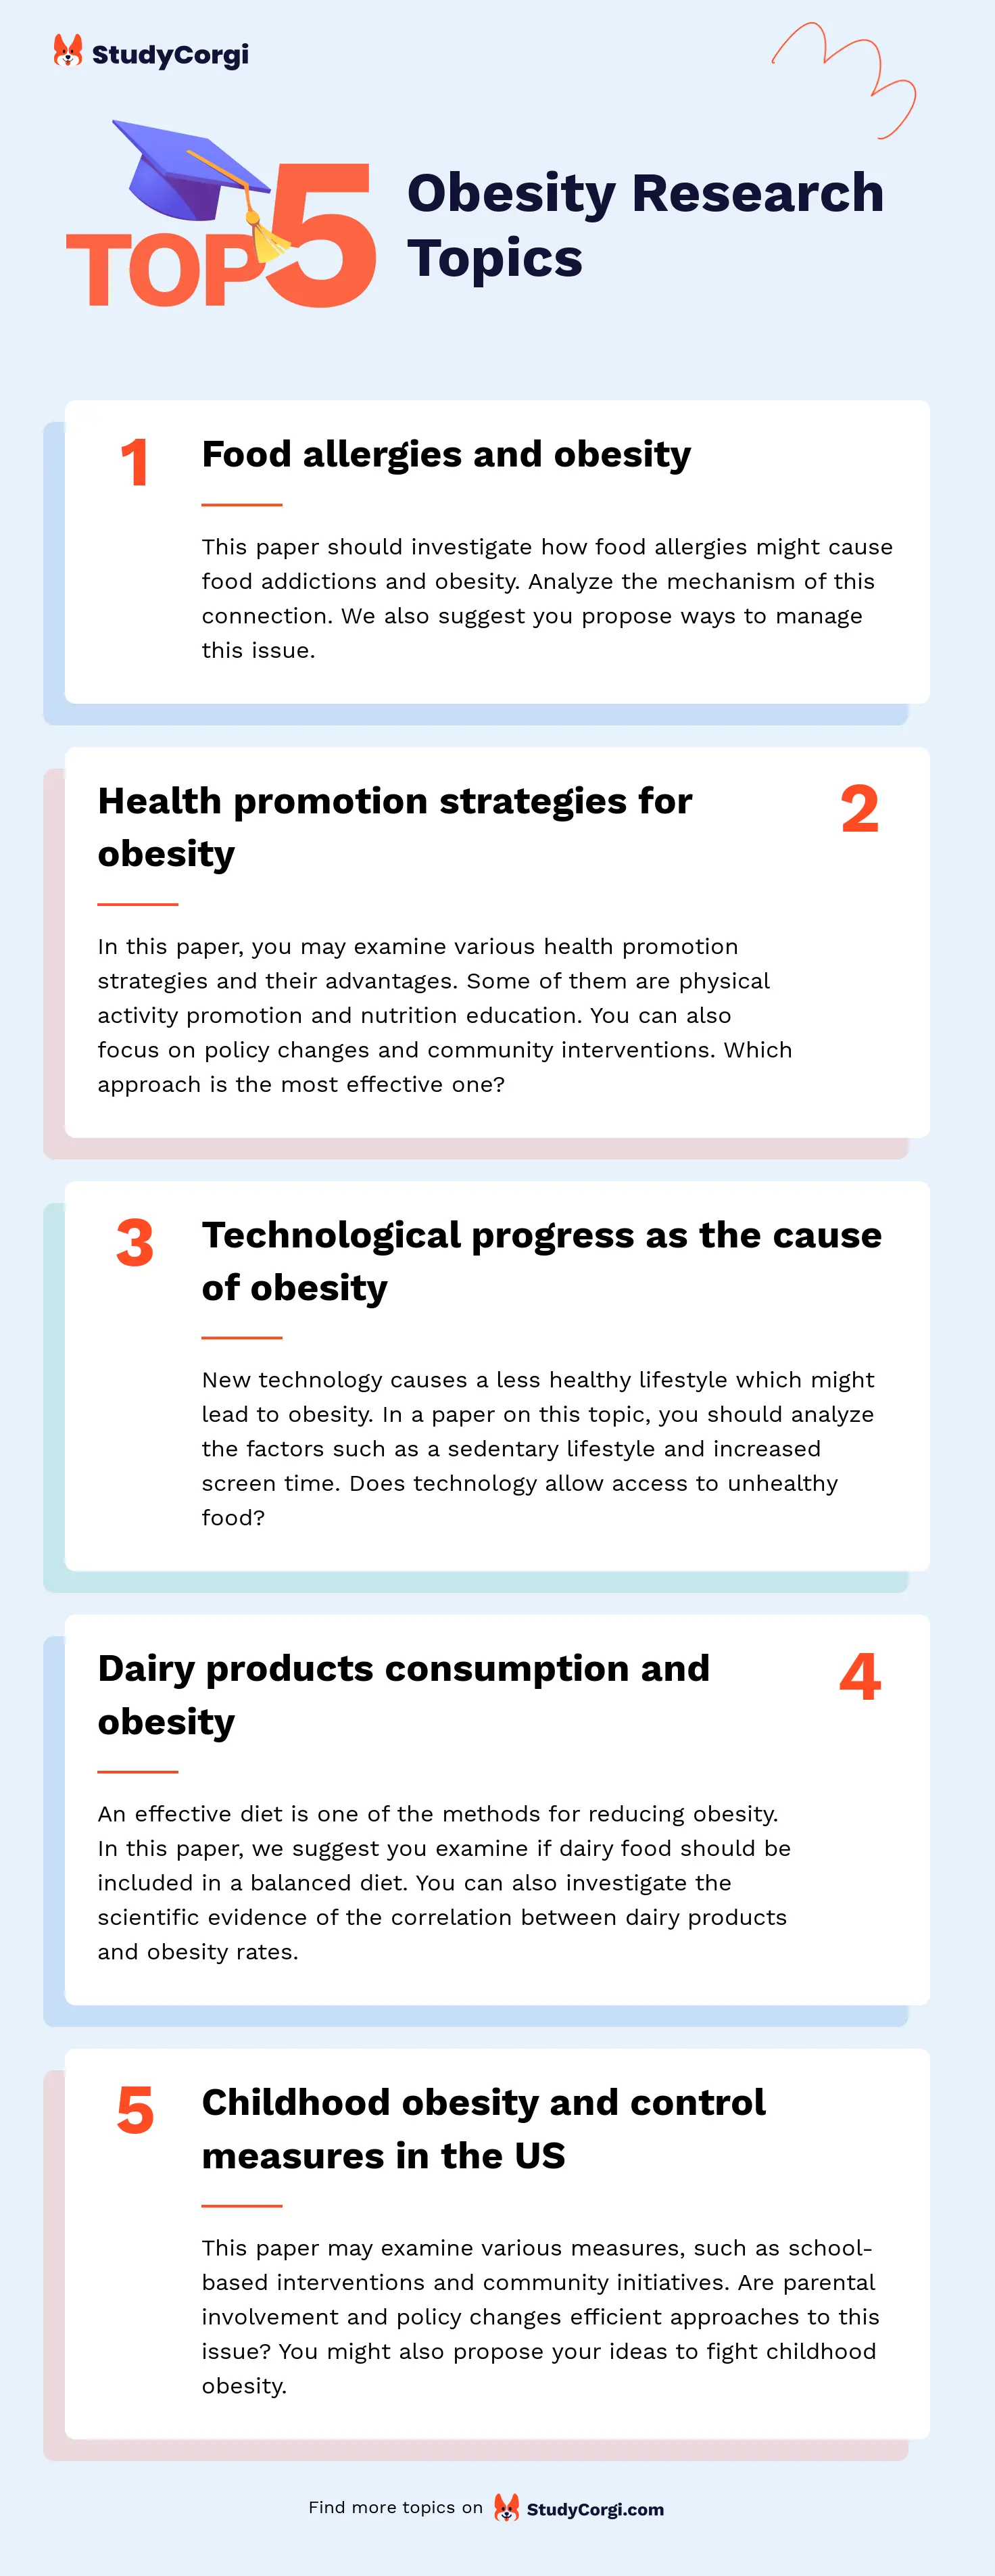 TOP-5 Obesity Research Topics